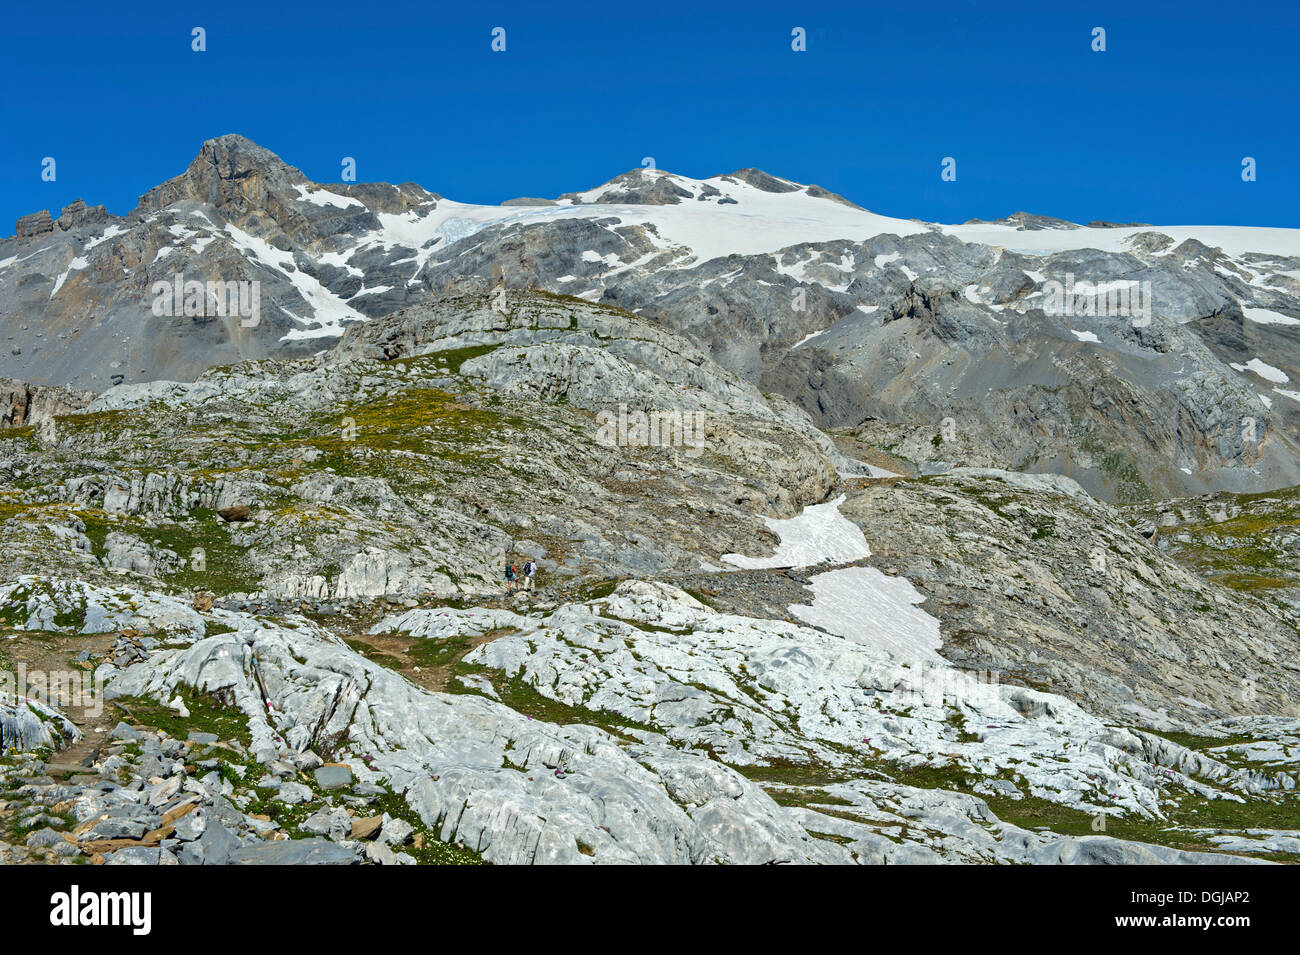 Hikers in the rocky terrain below the summit of Wildhorn Mountain, Bernese Alps, Canton of Valais, Switzerland Stock Photo